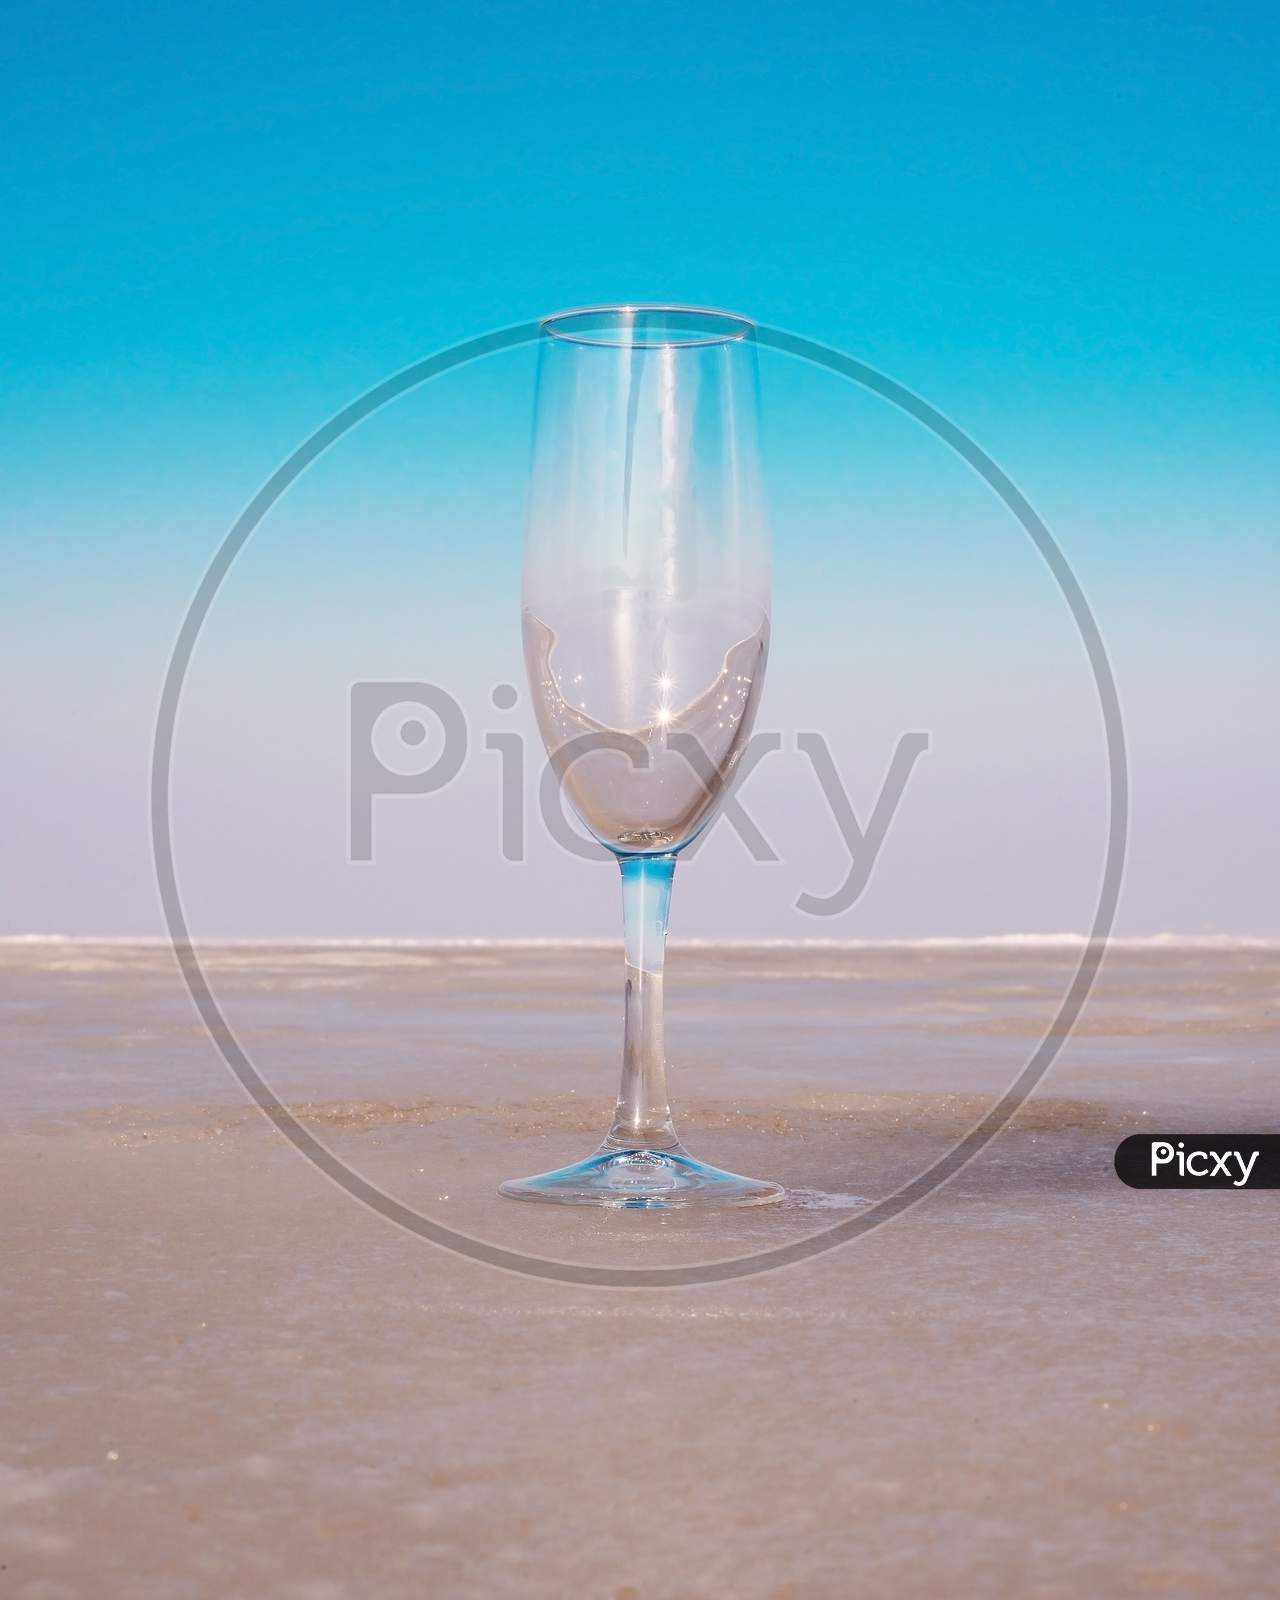 Empty wineglass goblet on beige surface against blue sky background